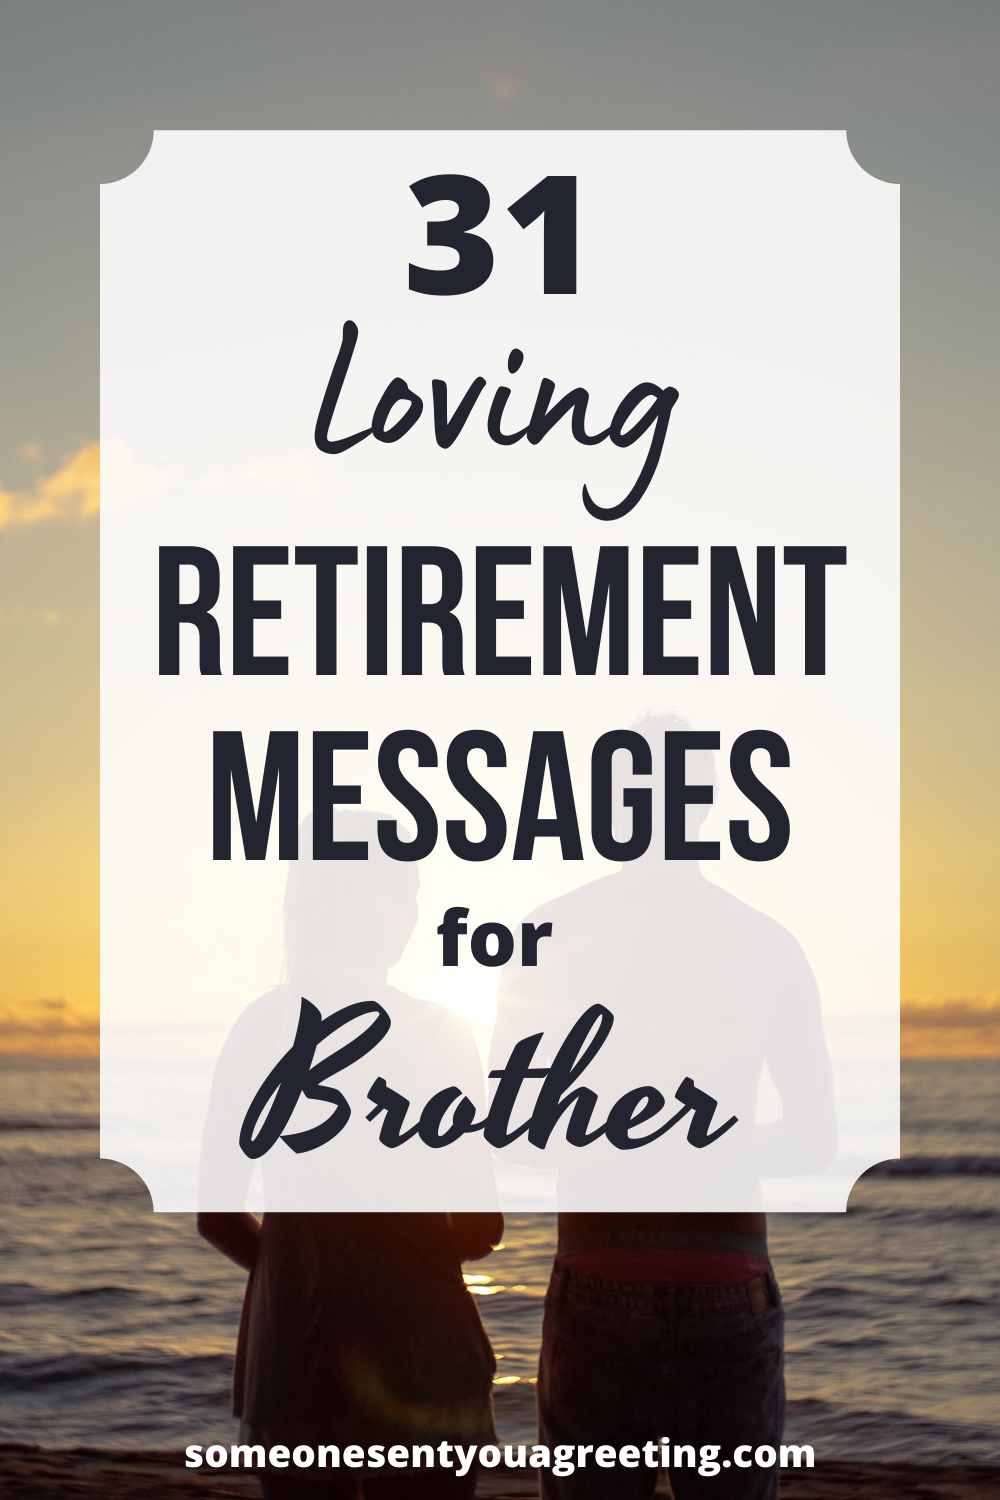 Retirement message for brother